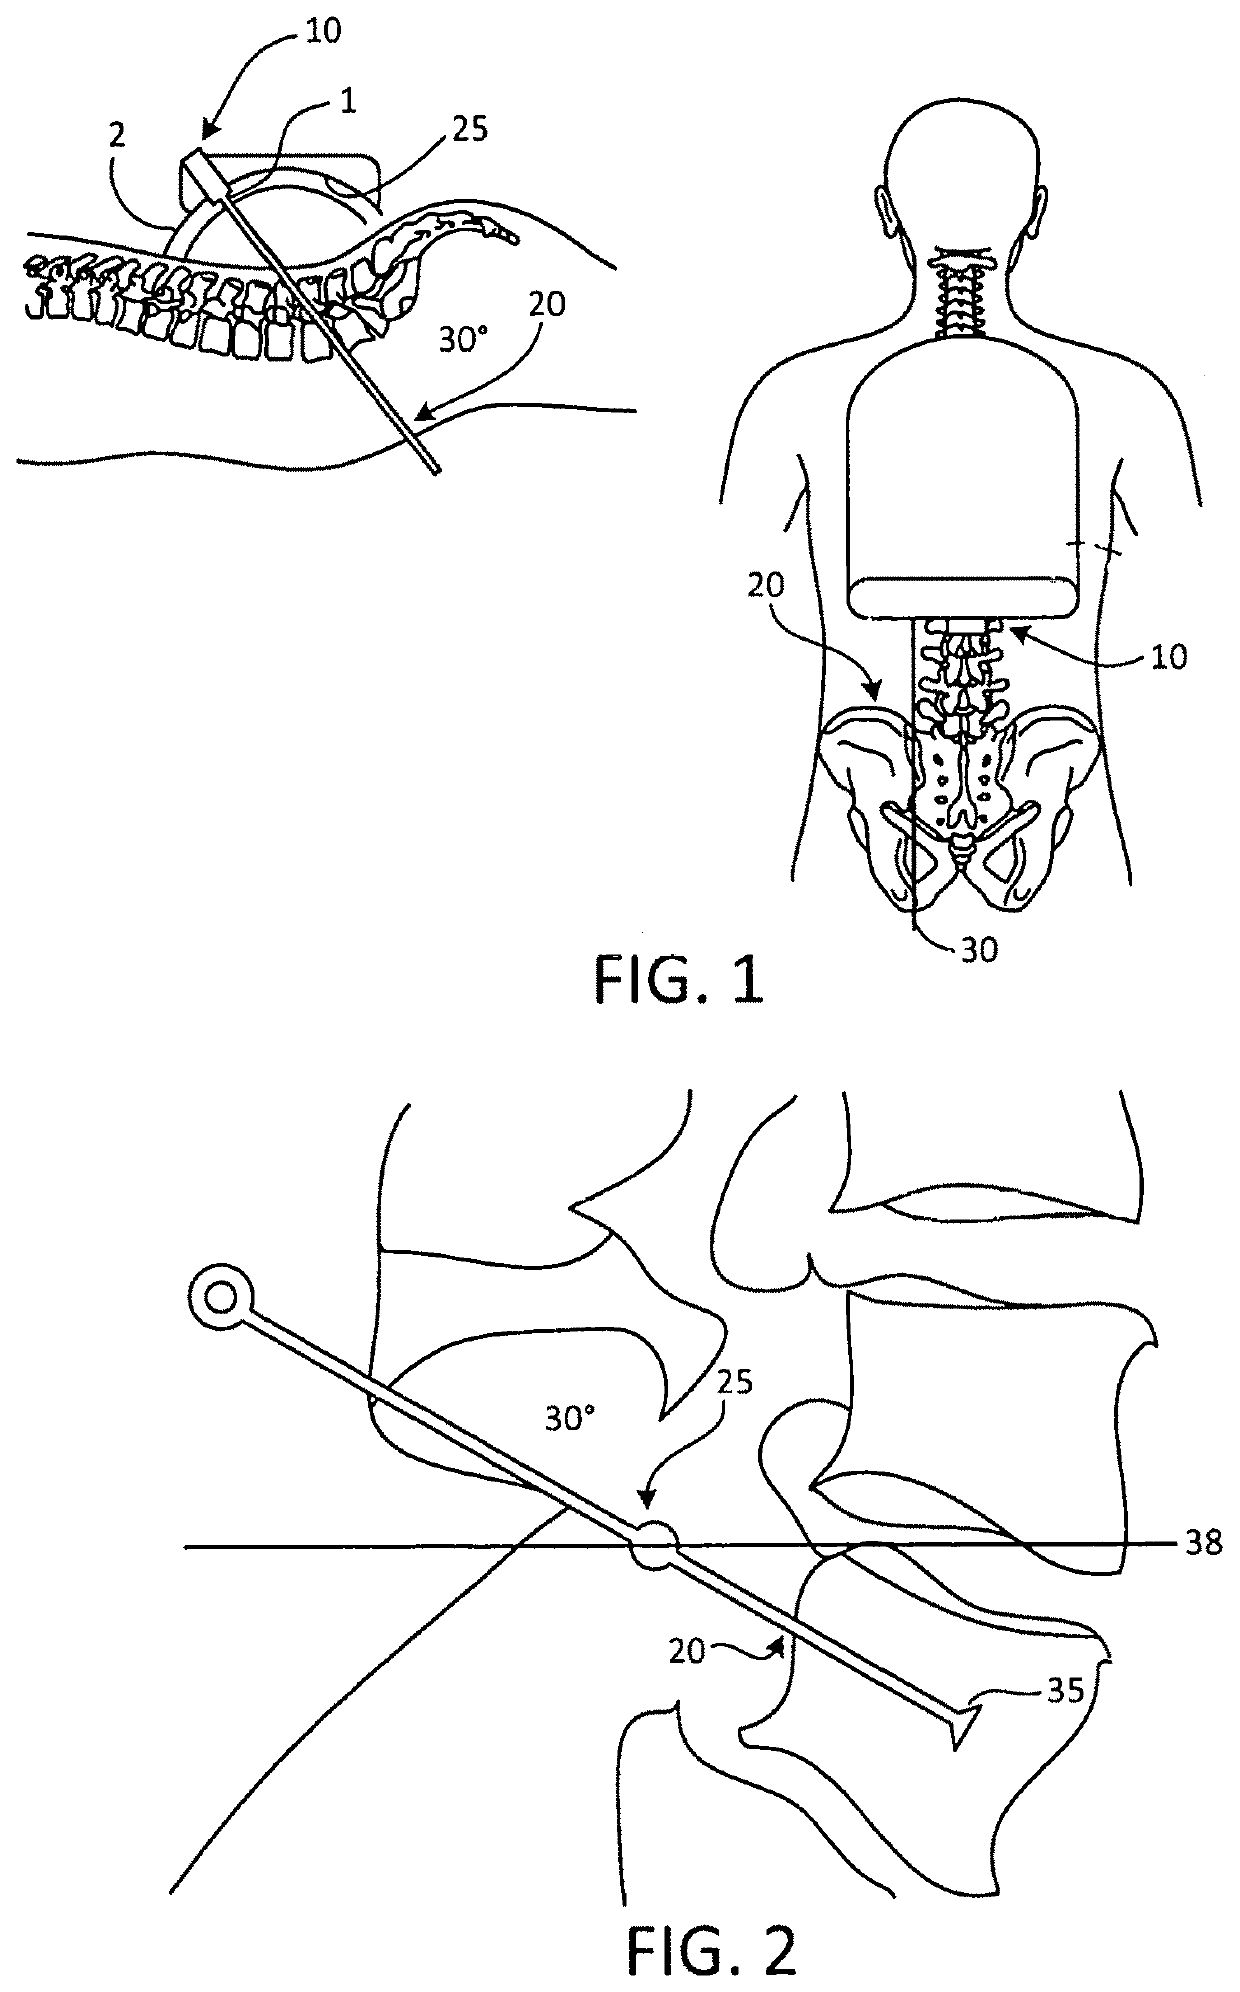 Surgical targeting systems and methods